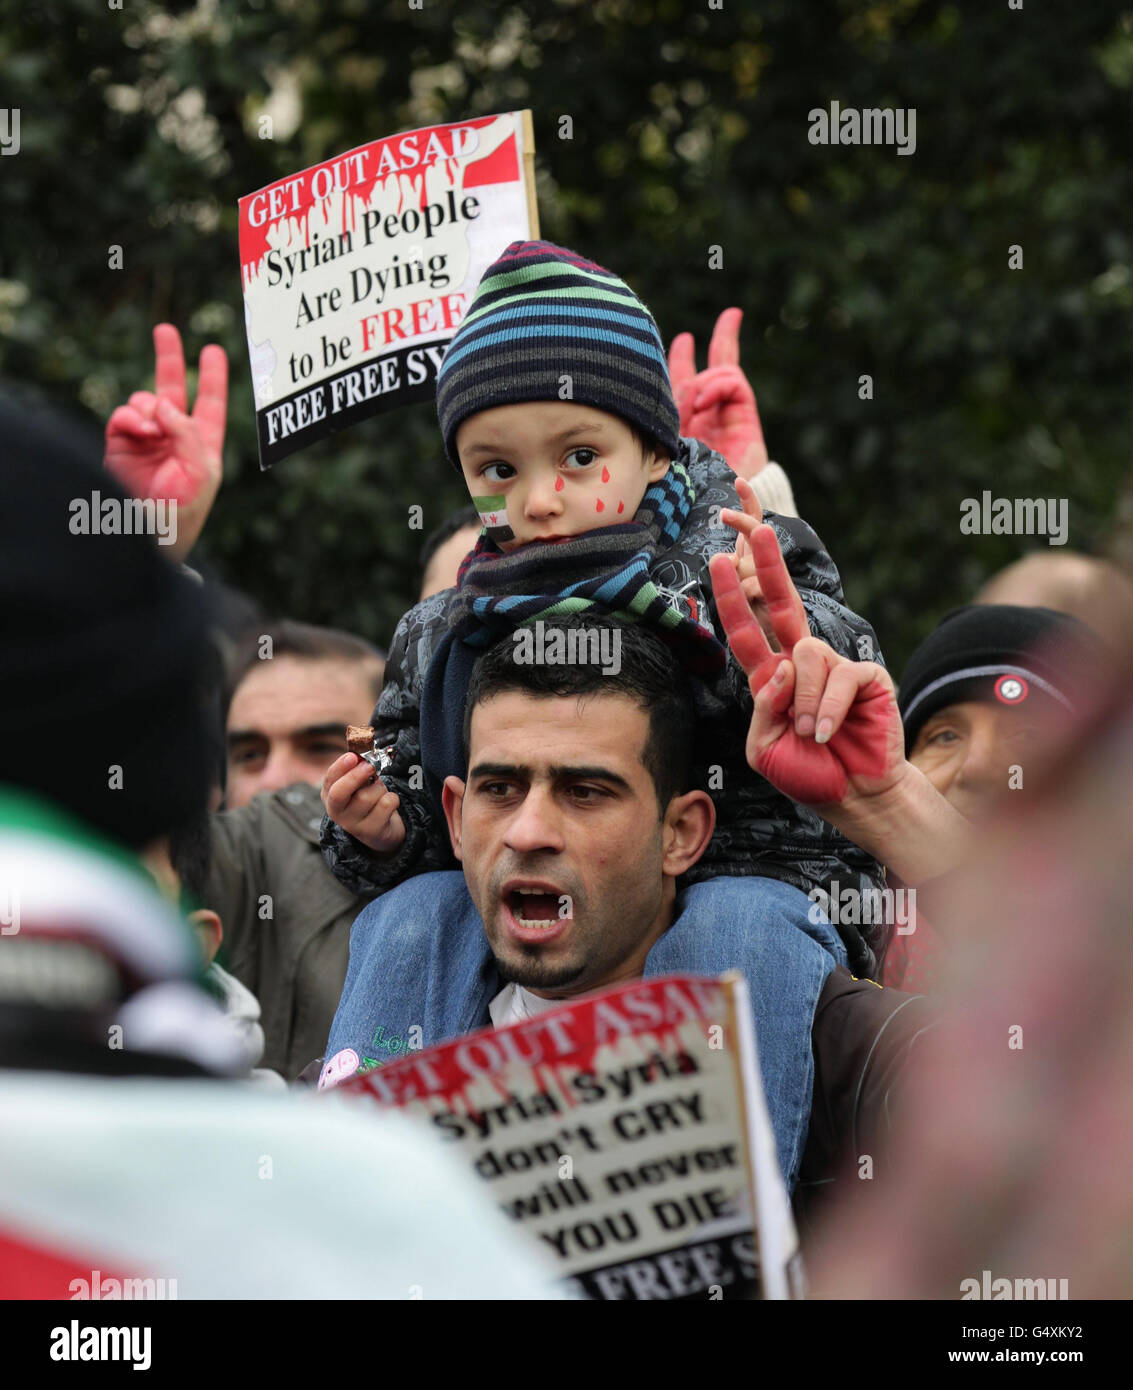 Protesters outside the Syrian Embassy in central London, amid reports of more than 200 people being killed in a deadly barrage in the city of Homs, Syria. Stock Photo